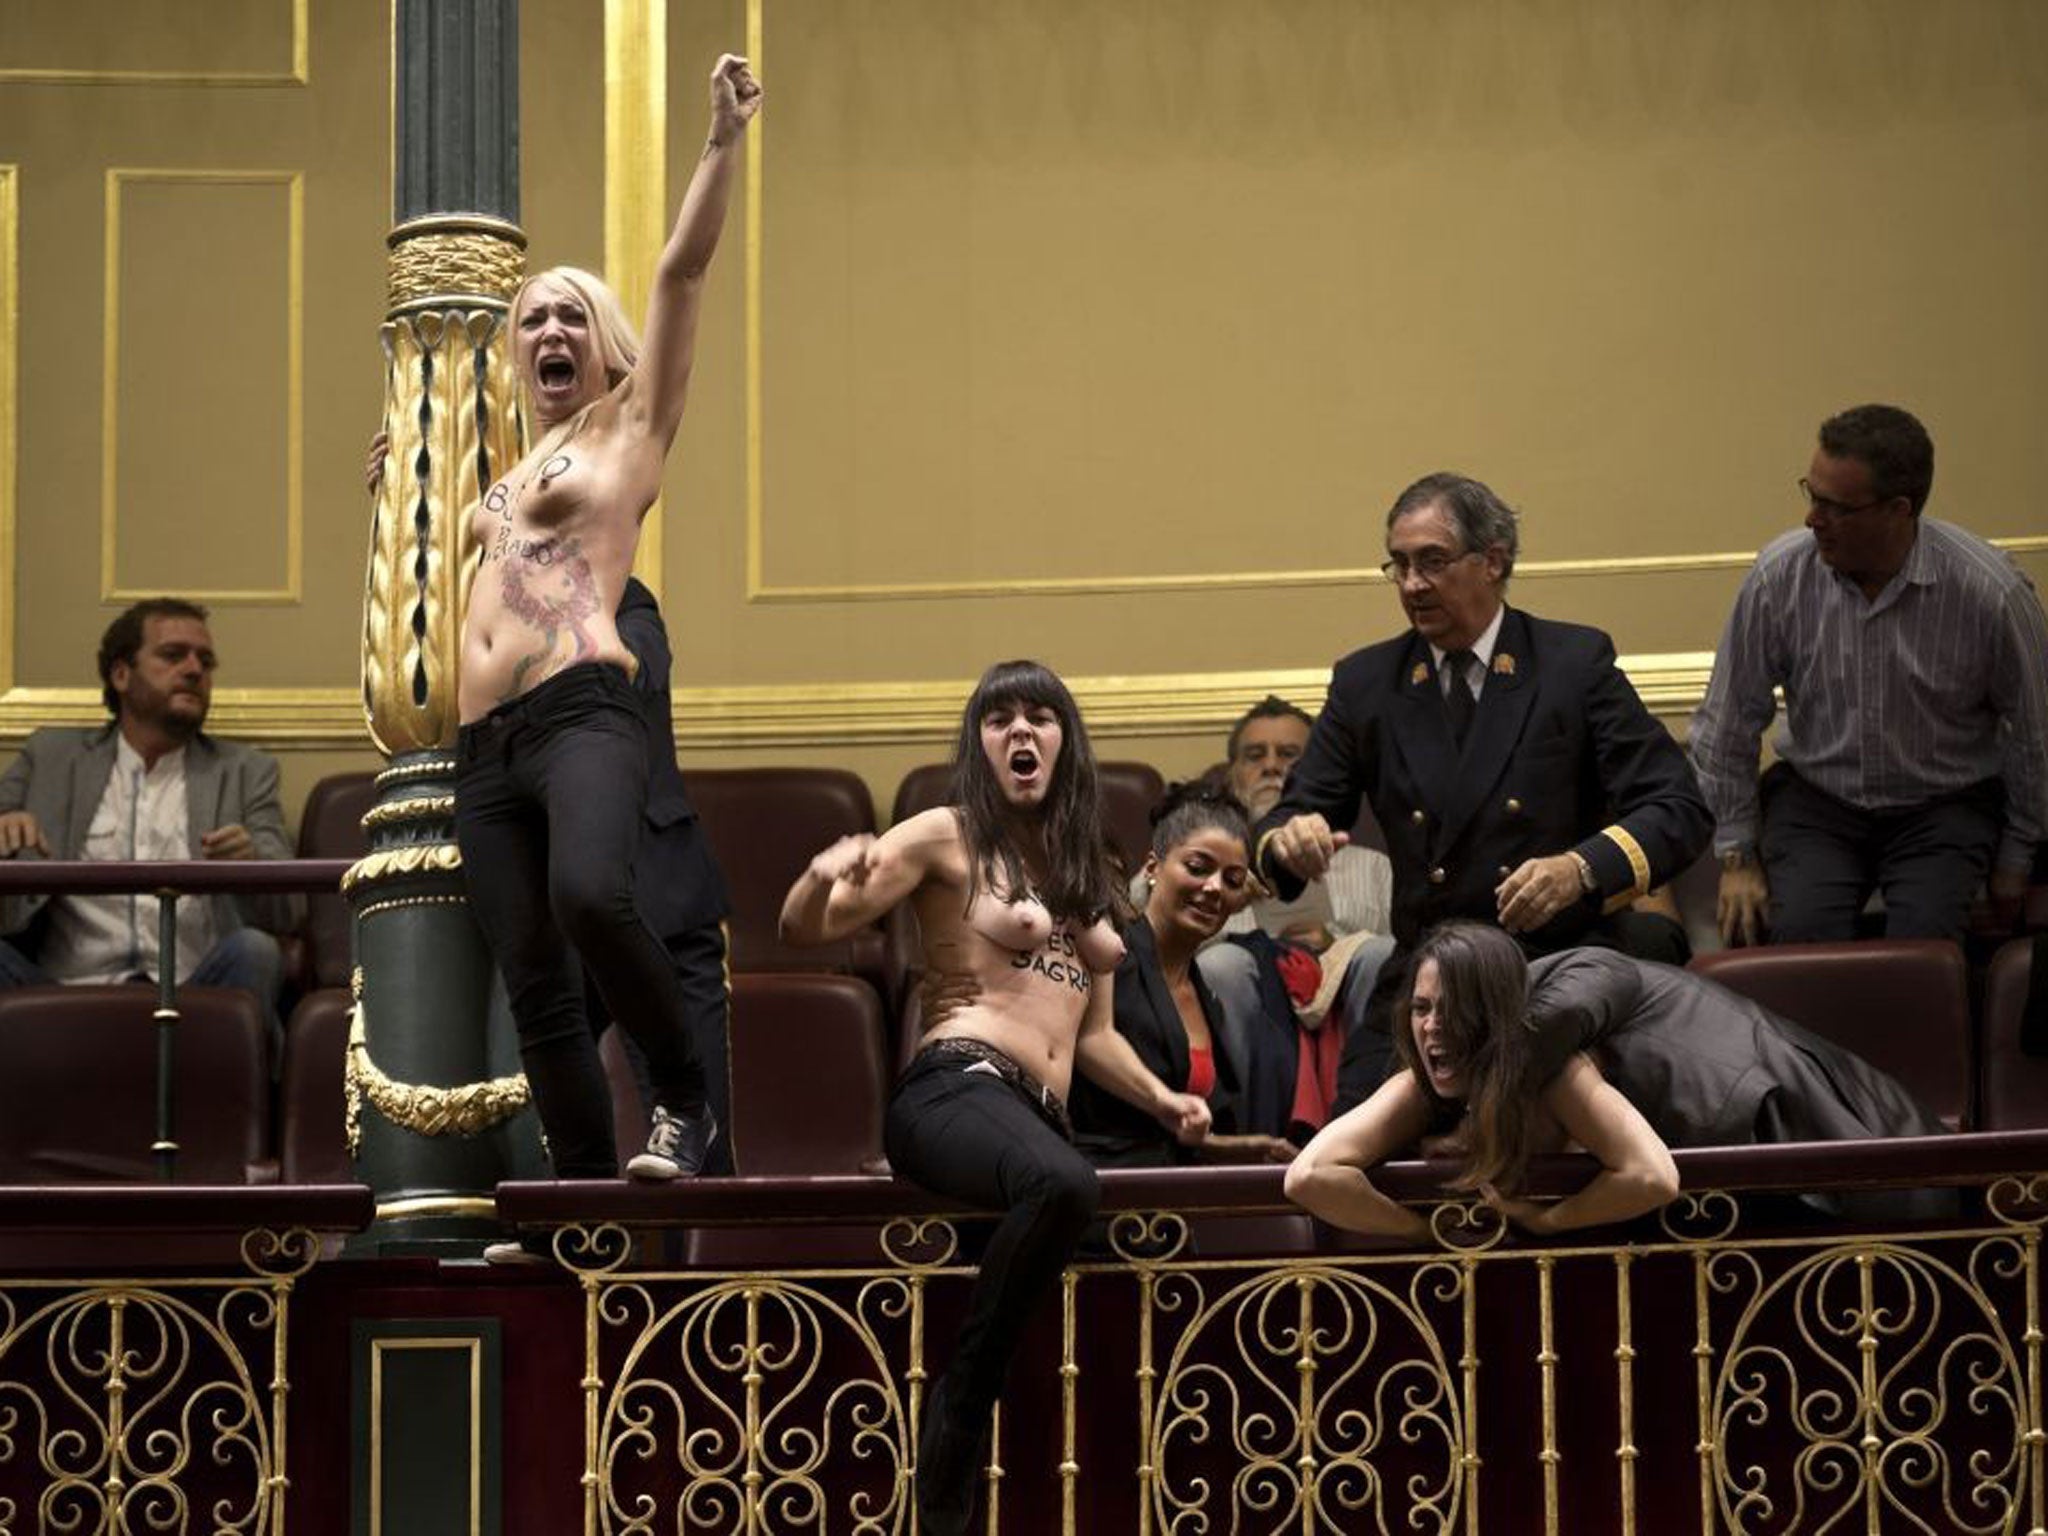 Activists from the women's movement Femen demonstrating in the Spanish parliament against the government's conservative new abortion law, with 'Abortion is Sacred' written on their bodies